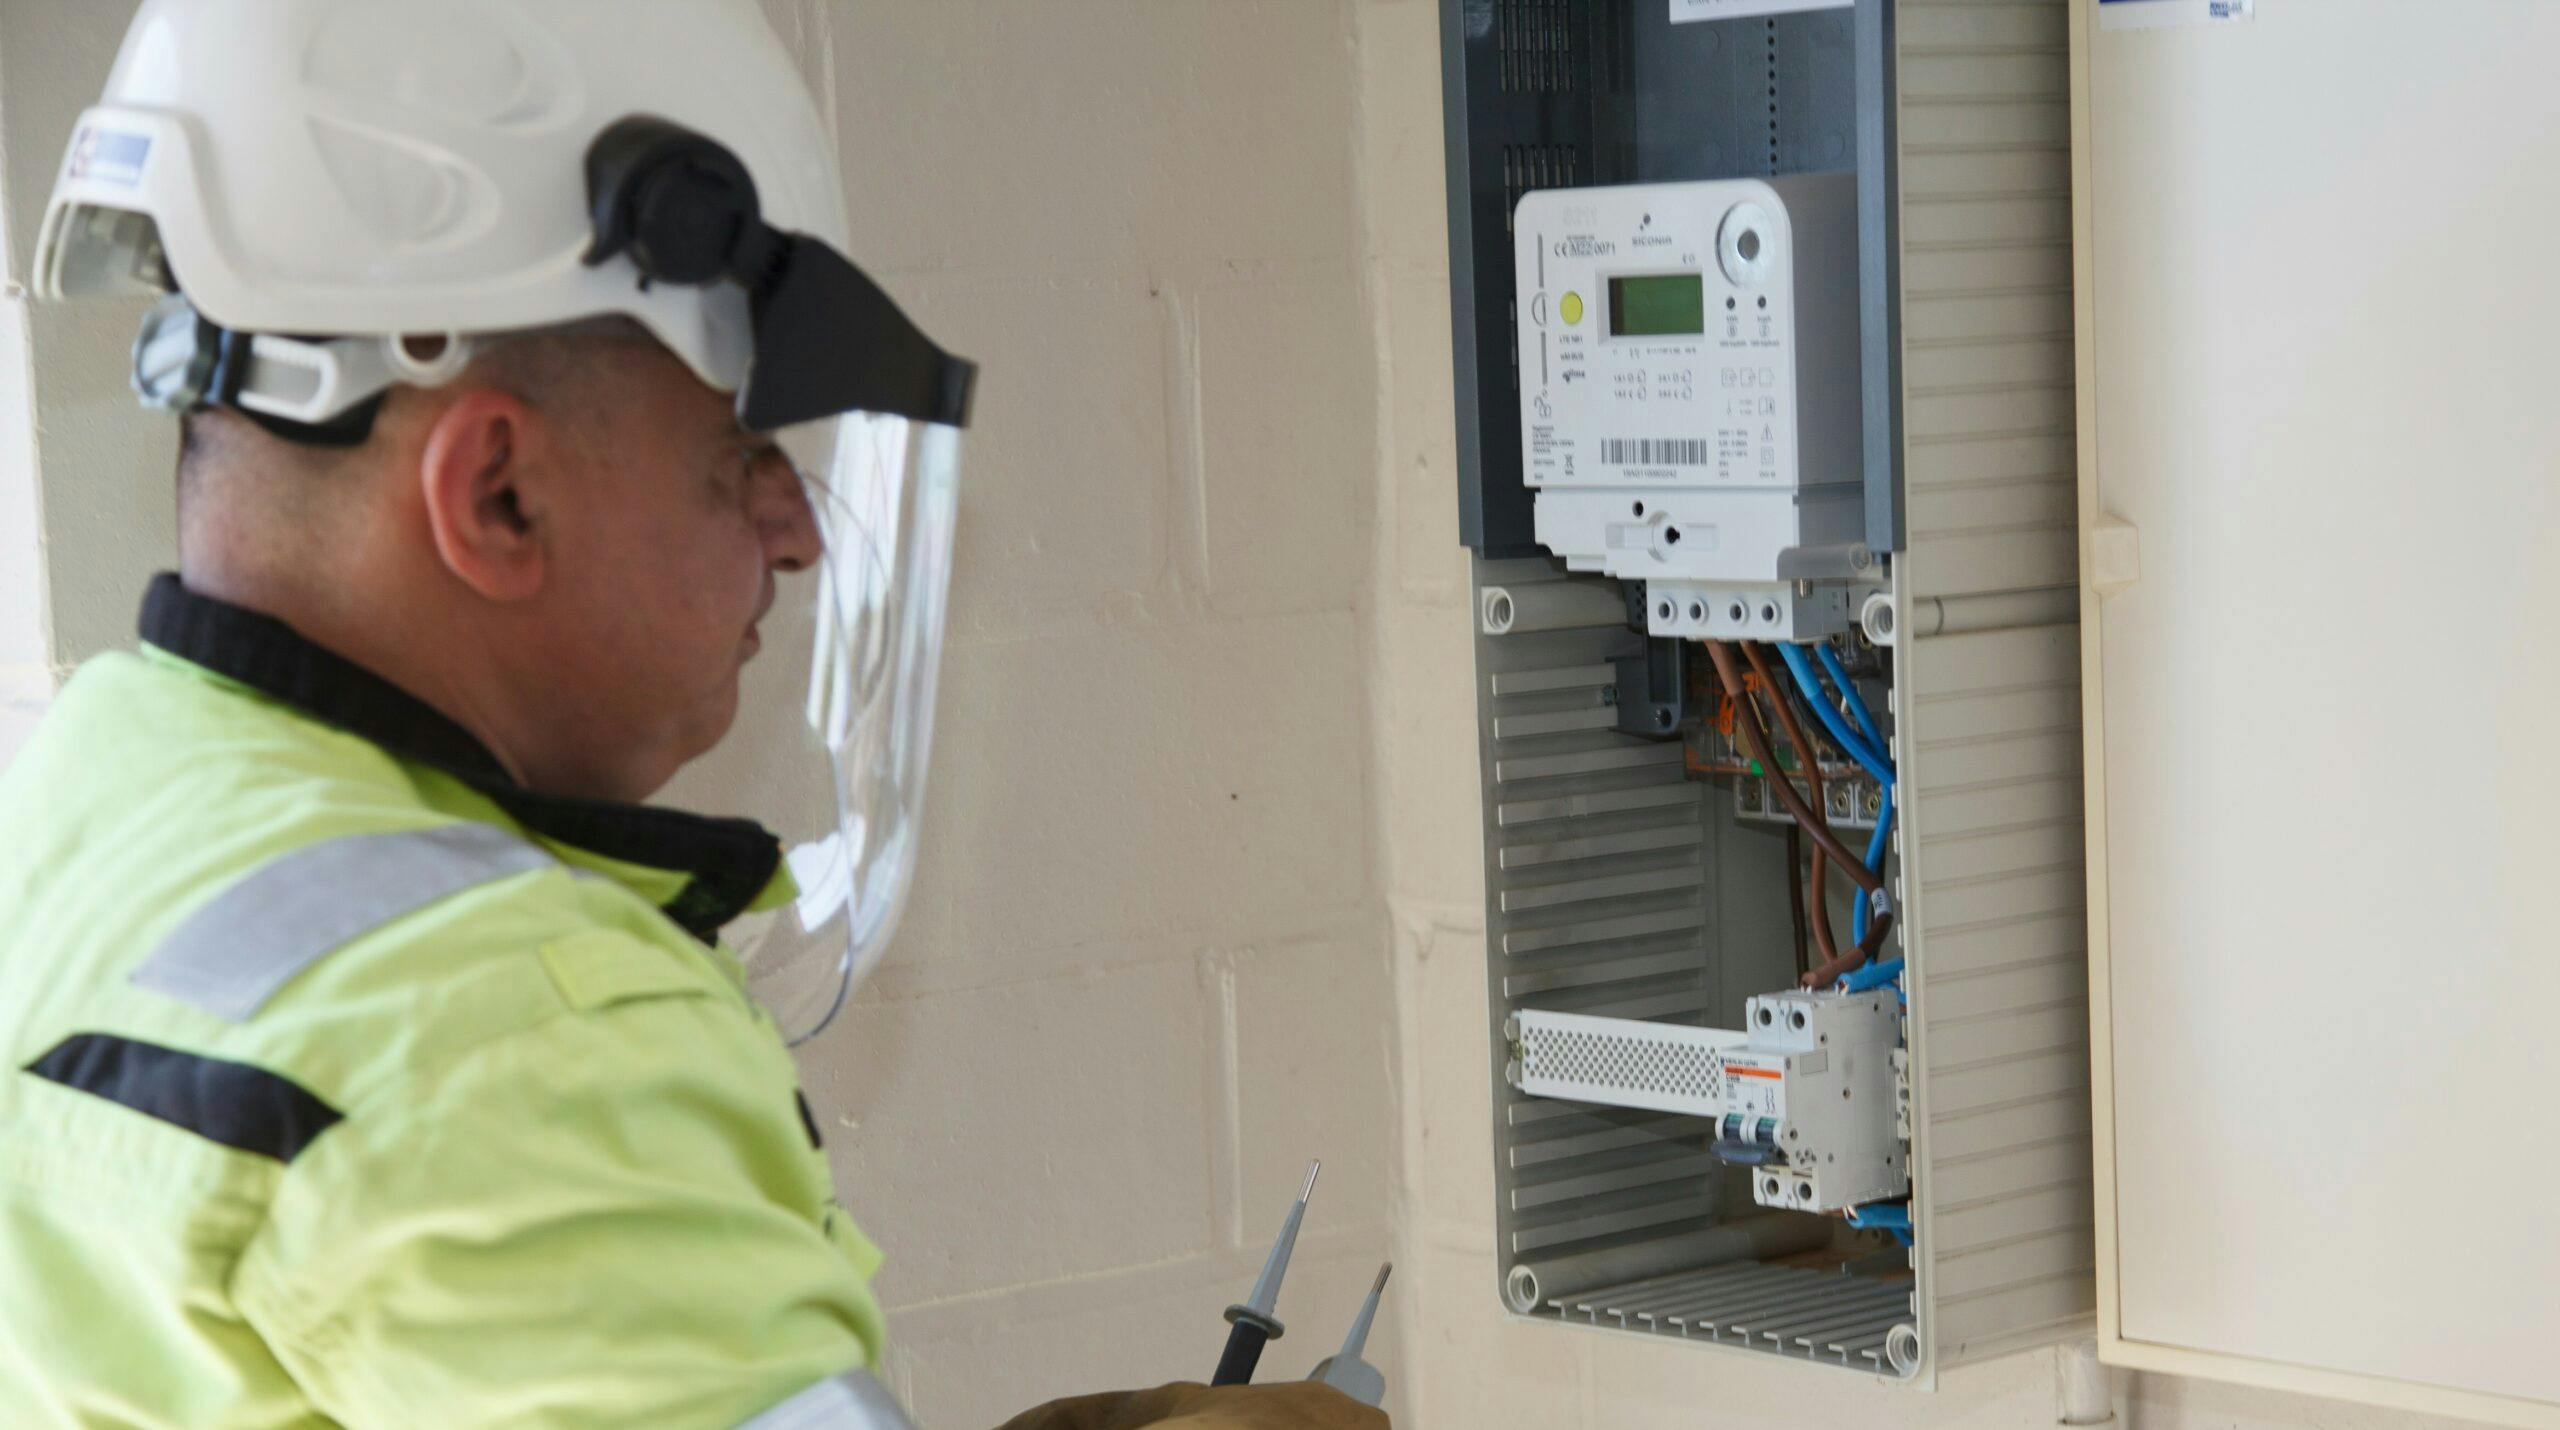 Unit-T technician in a yellow vest and with a white construction helm repairing a smart meter